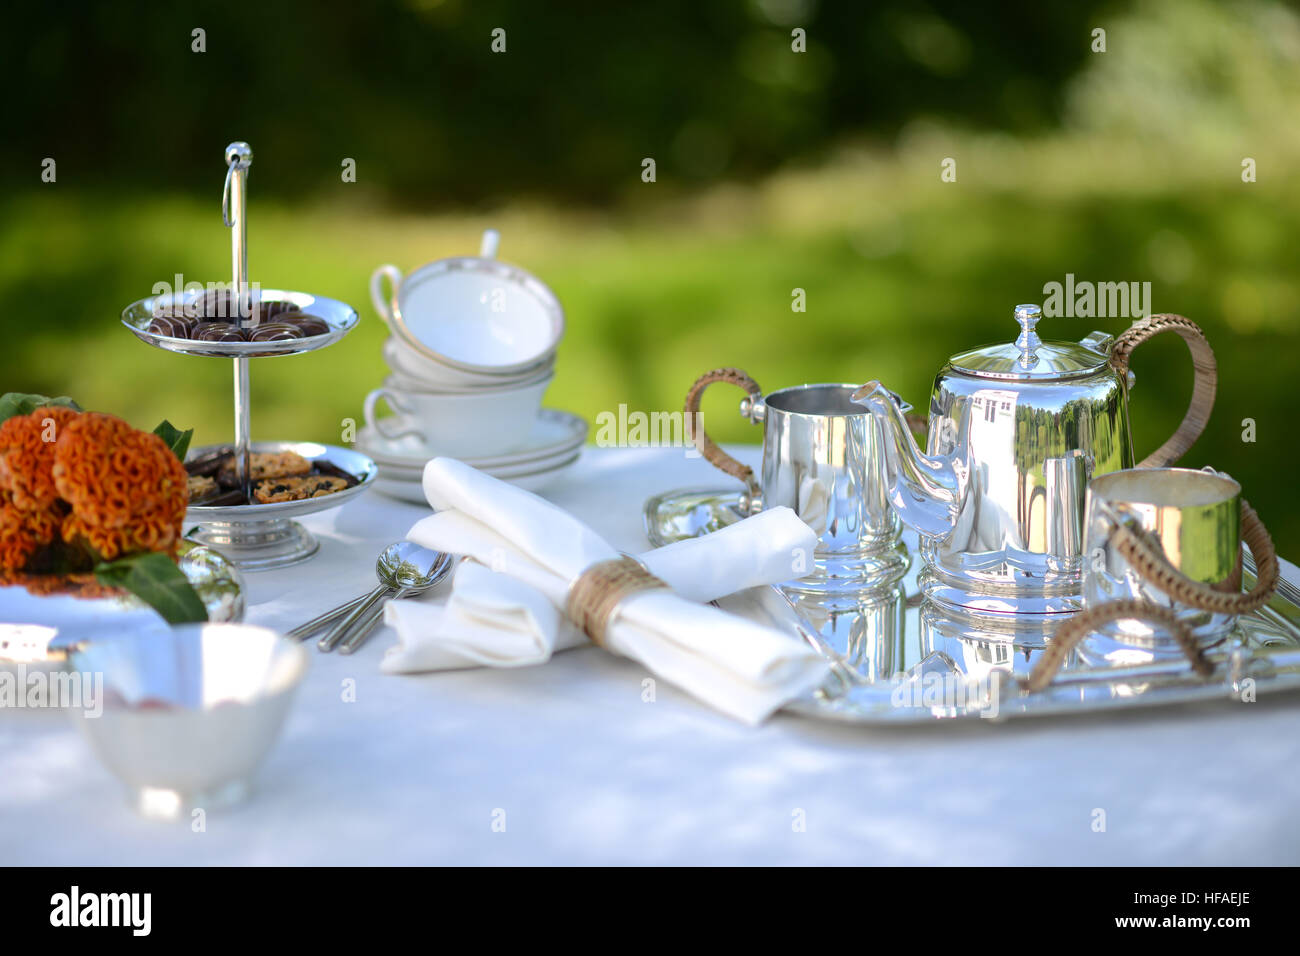 Table set for an English high tea, or afternoon tea, outside with silver teapot and linen tablecloth Stock Photo